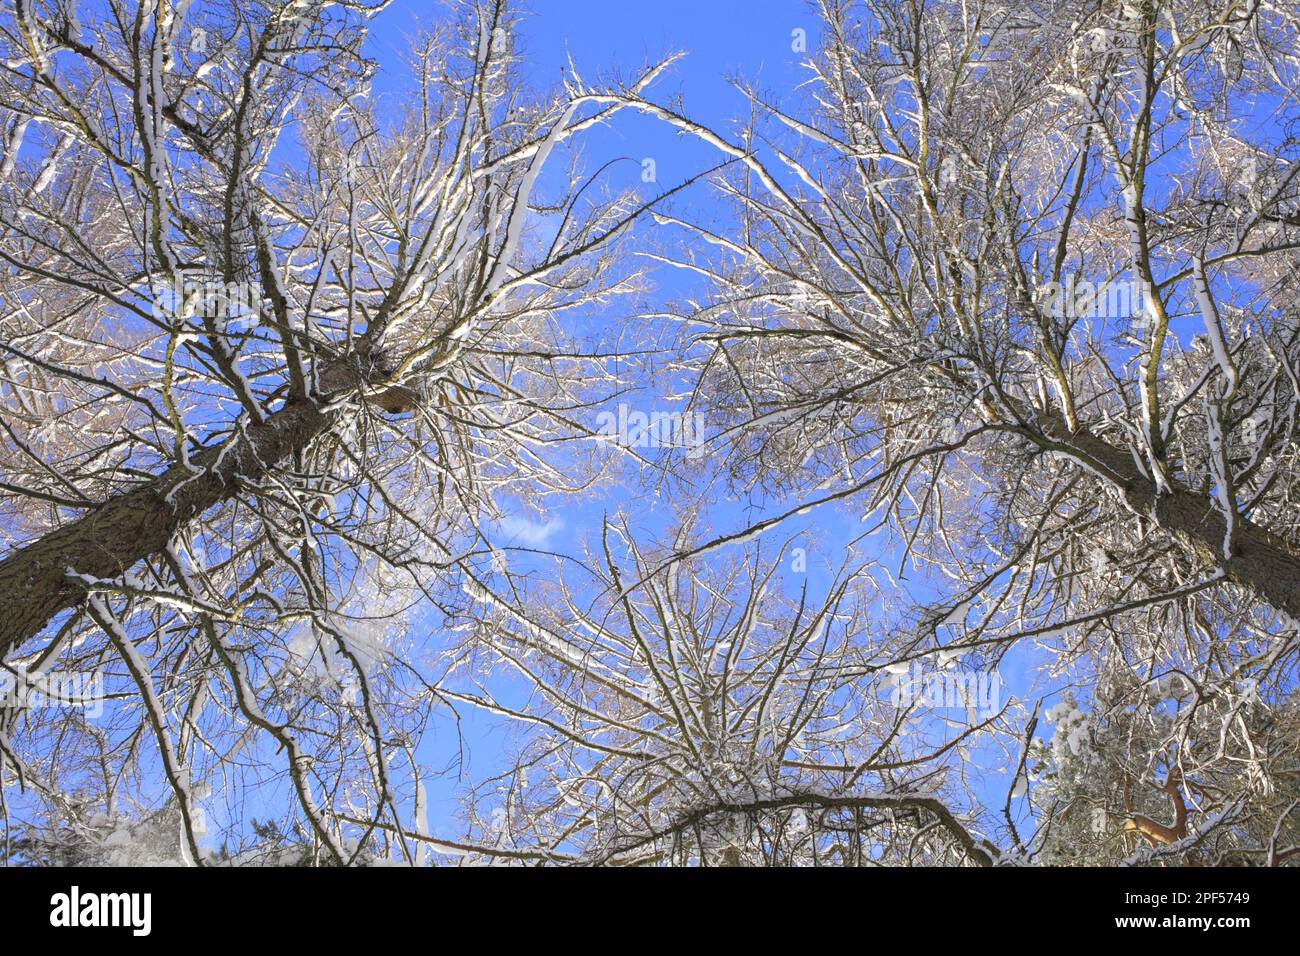 Snow-covered larch trees (Larix sp.) after snowfall, view into the canopy, Powys, Wales, United Kingdom Stock Photo